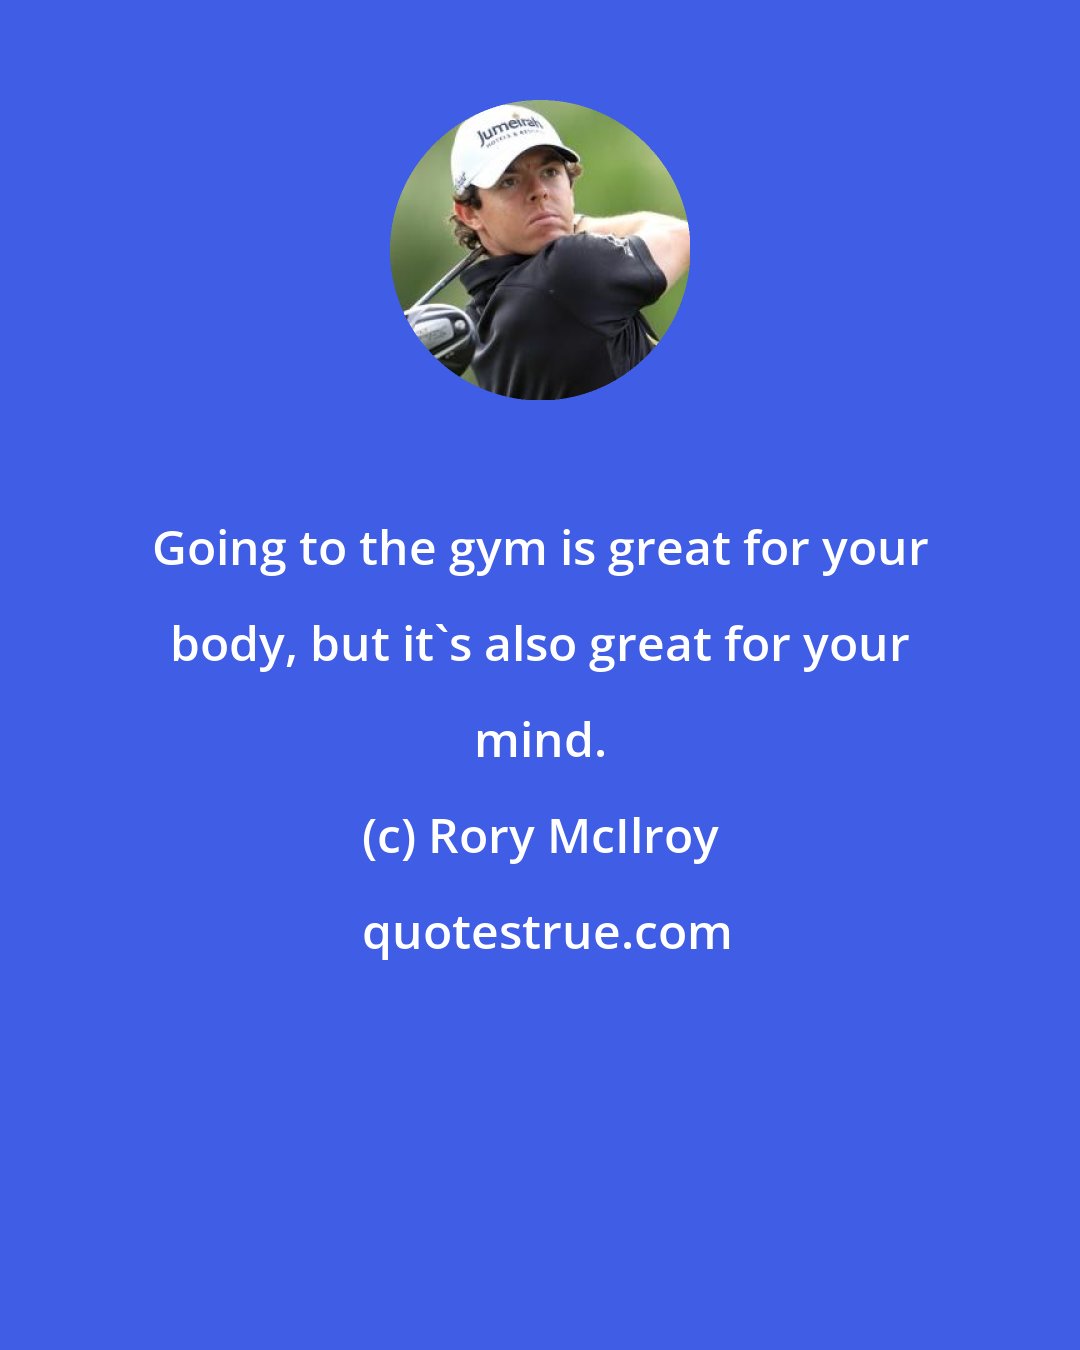 Rory McIlroy: Going to the gym is great for your body, but it's also great for your mind.